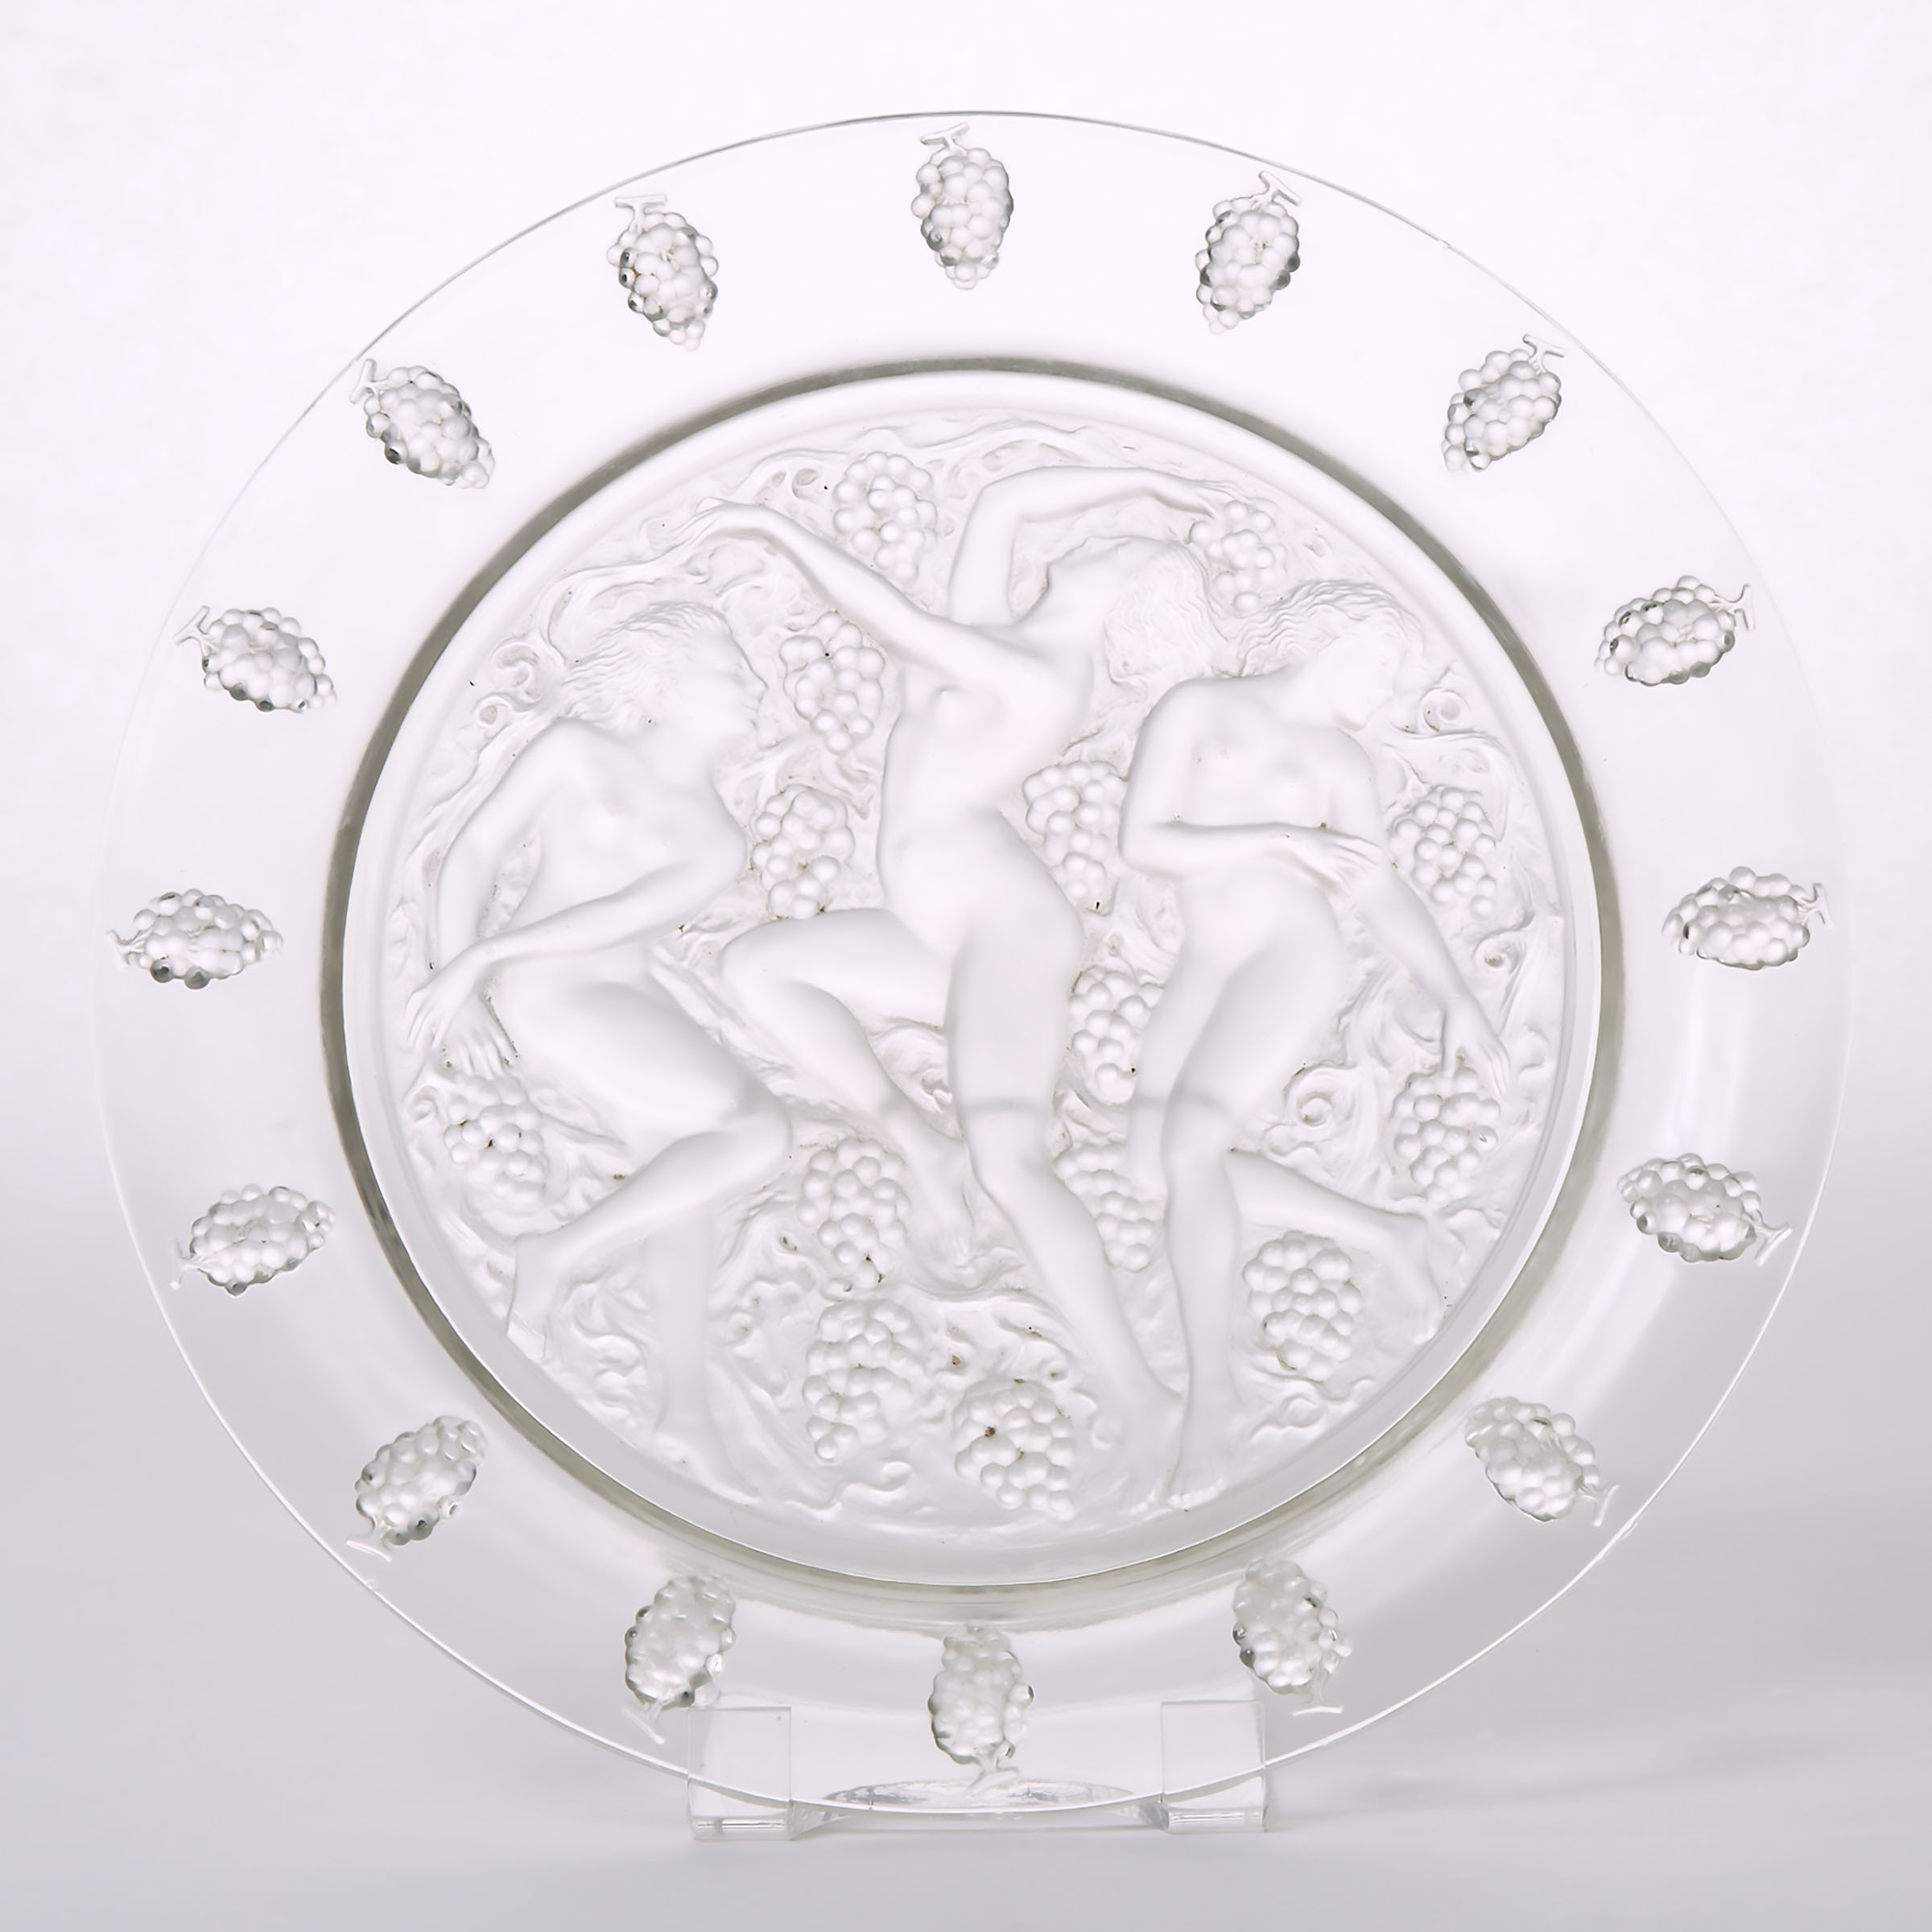 'Côte d'Or', Lalique Moulded and Partly Frosted Glass Charger, post-1945